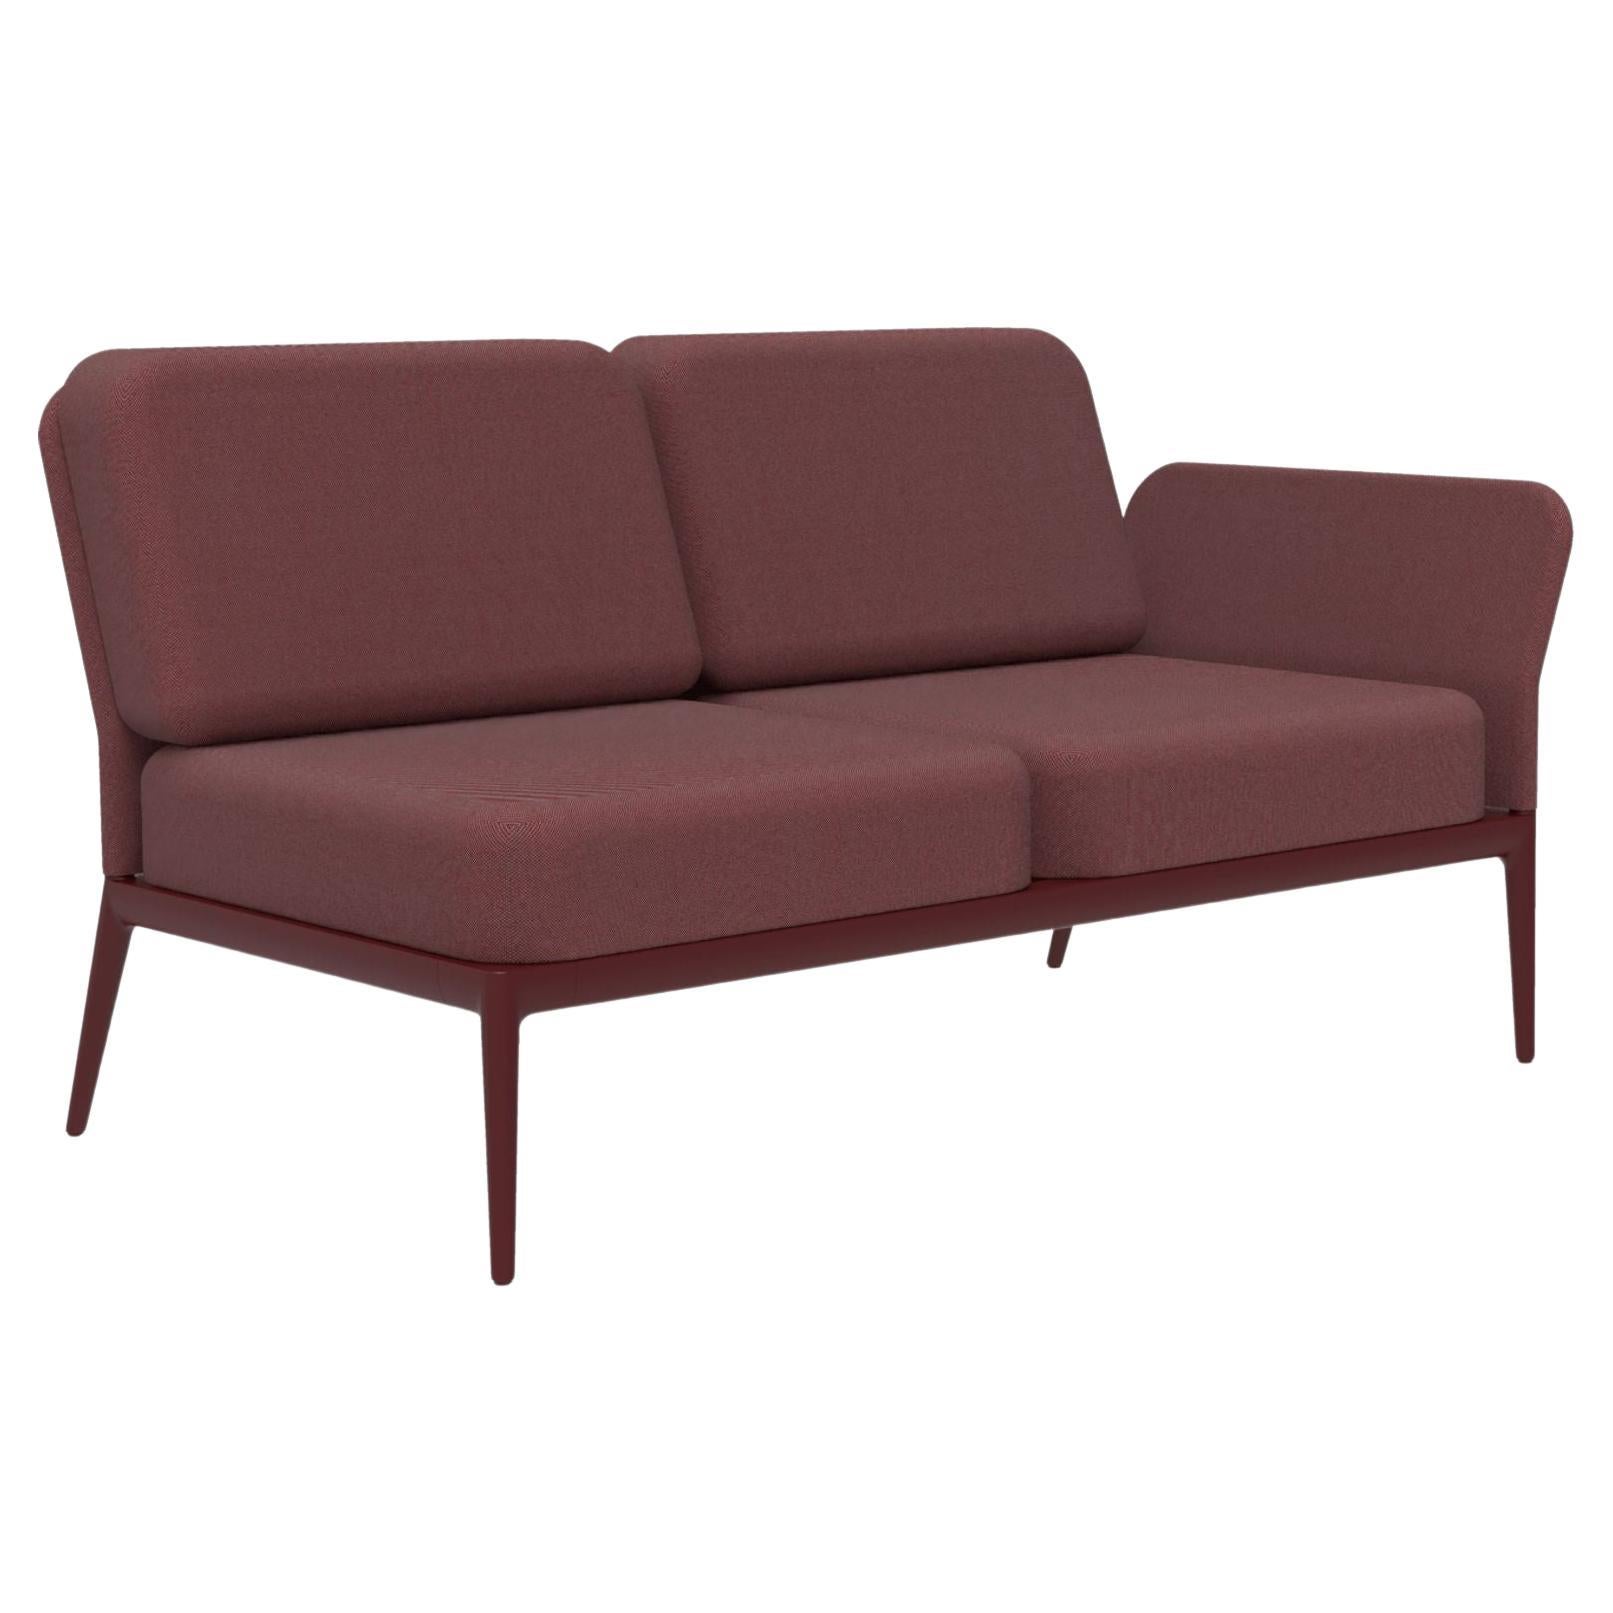 Cover Burgundy Double Left Modular Sofa by MOWEE For Sale